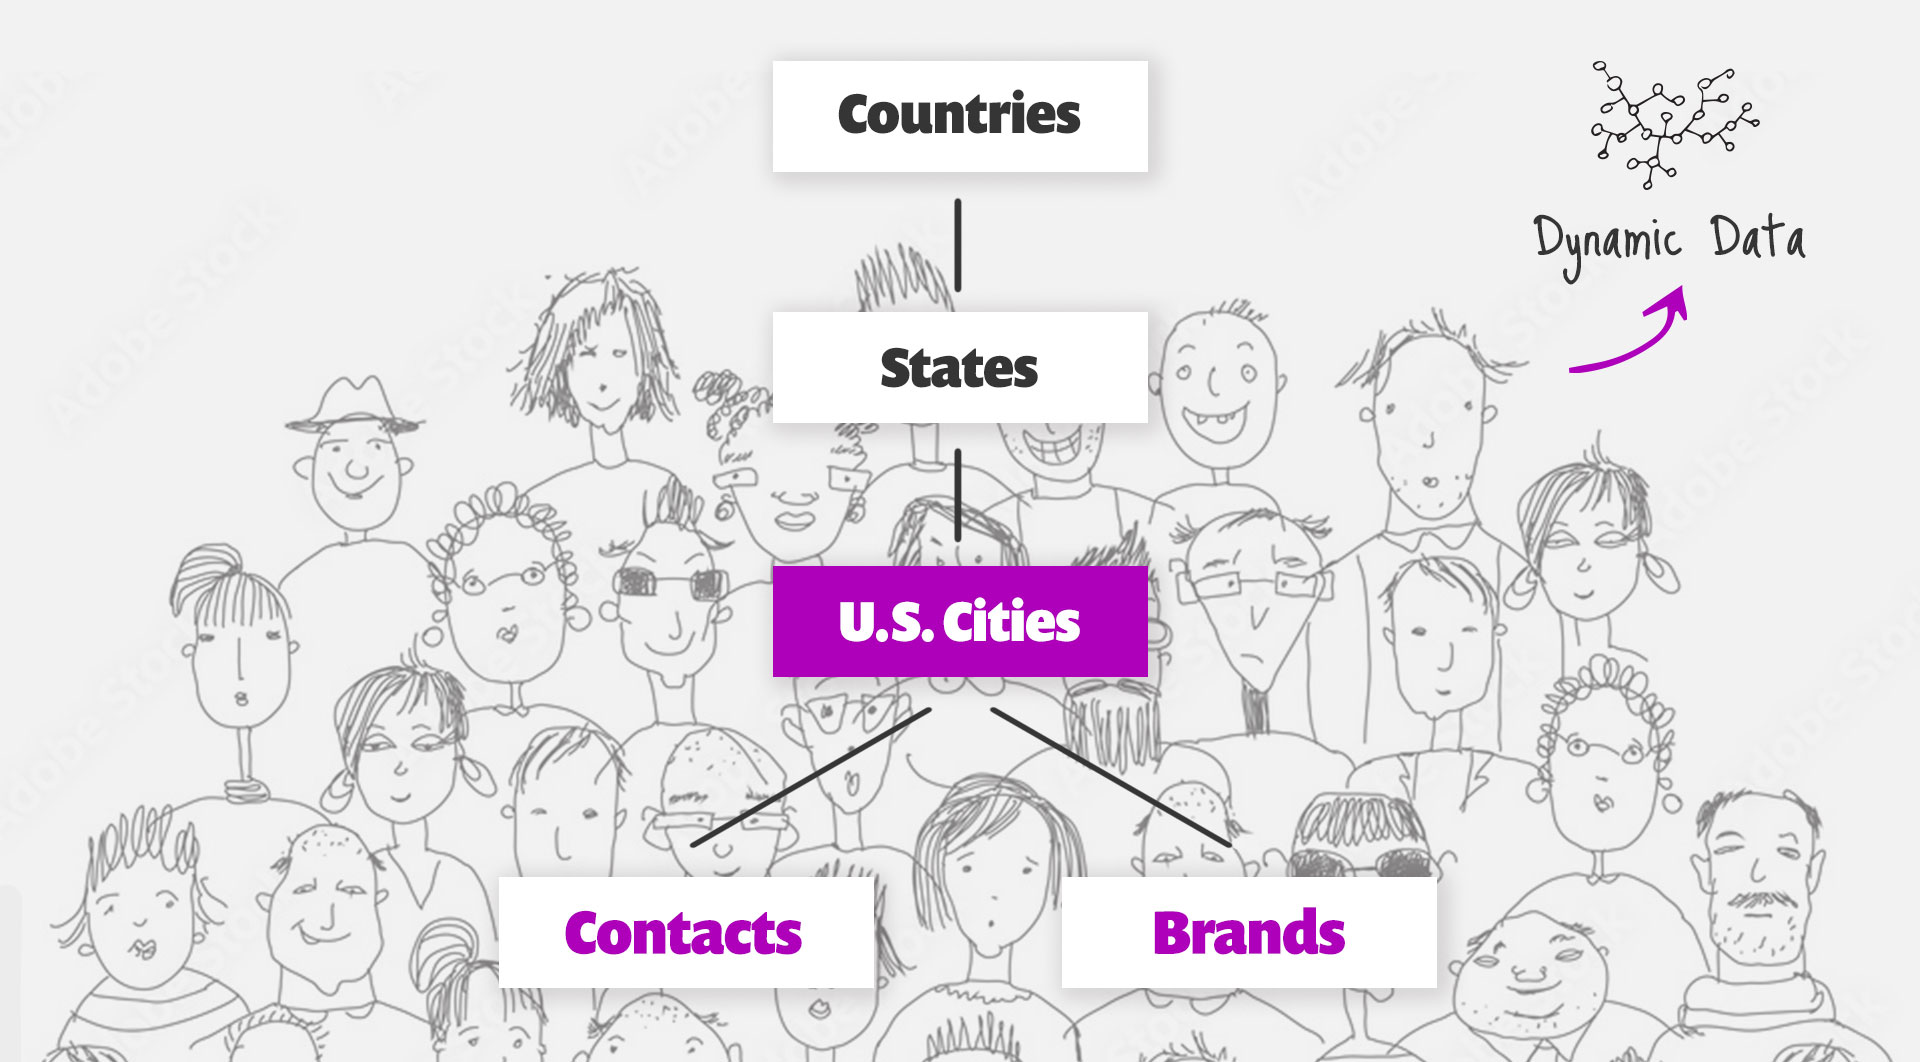 People & Brands by city